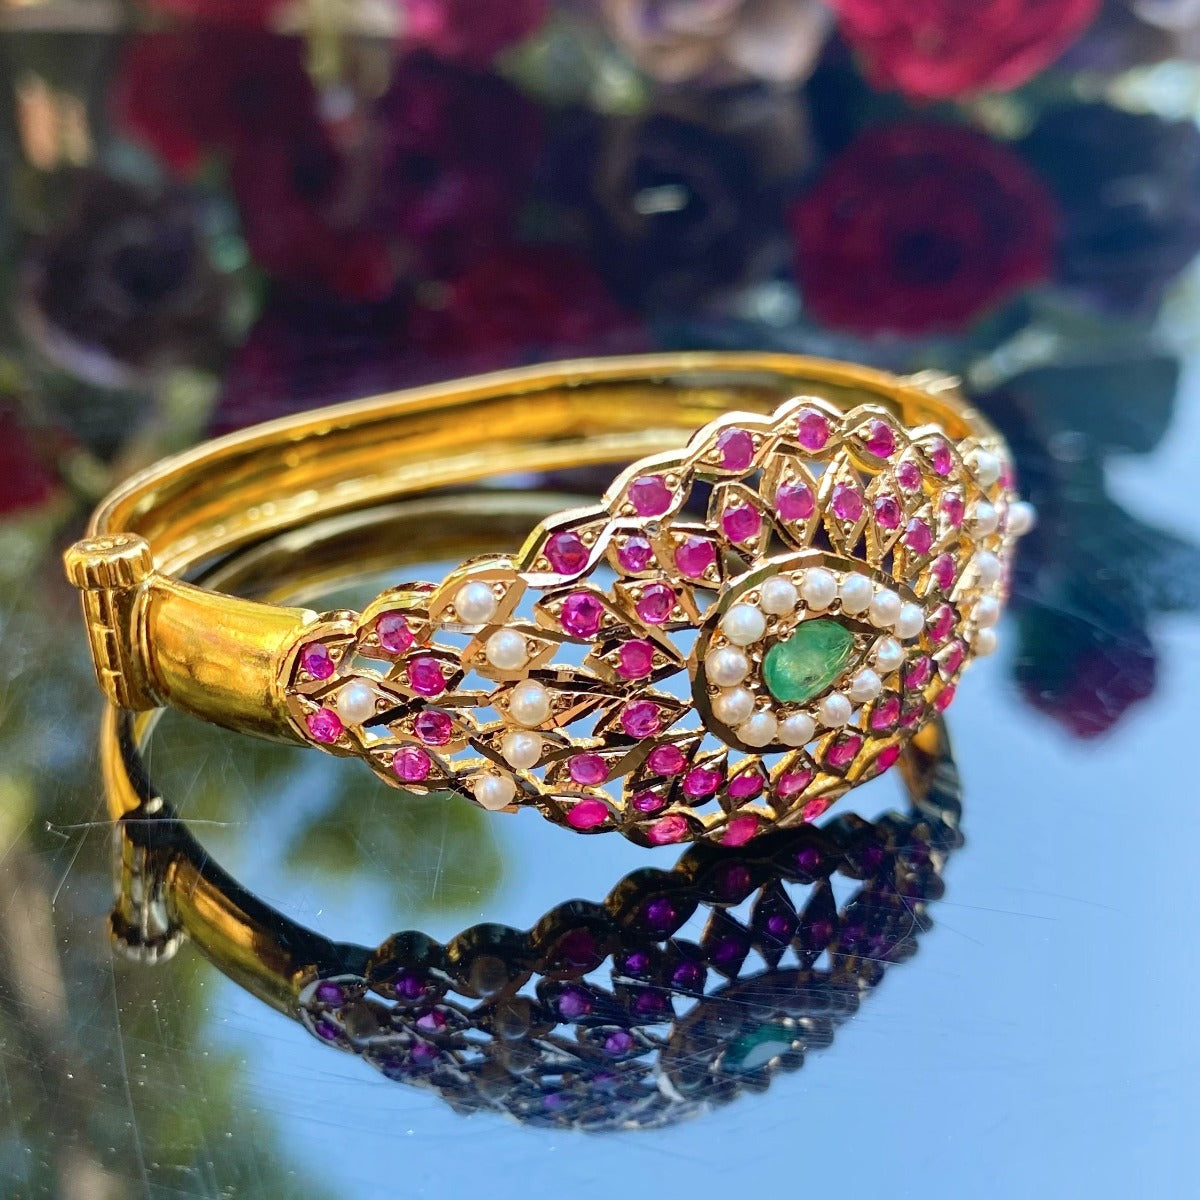 Jadau Bracelet Studded with Rubies and Emeralds in 22ct Gold Hallmark GBNG 014